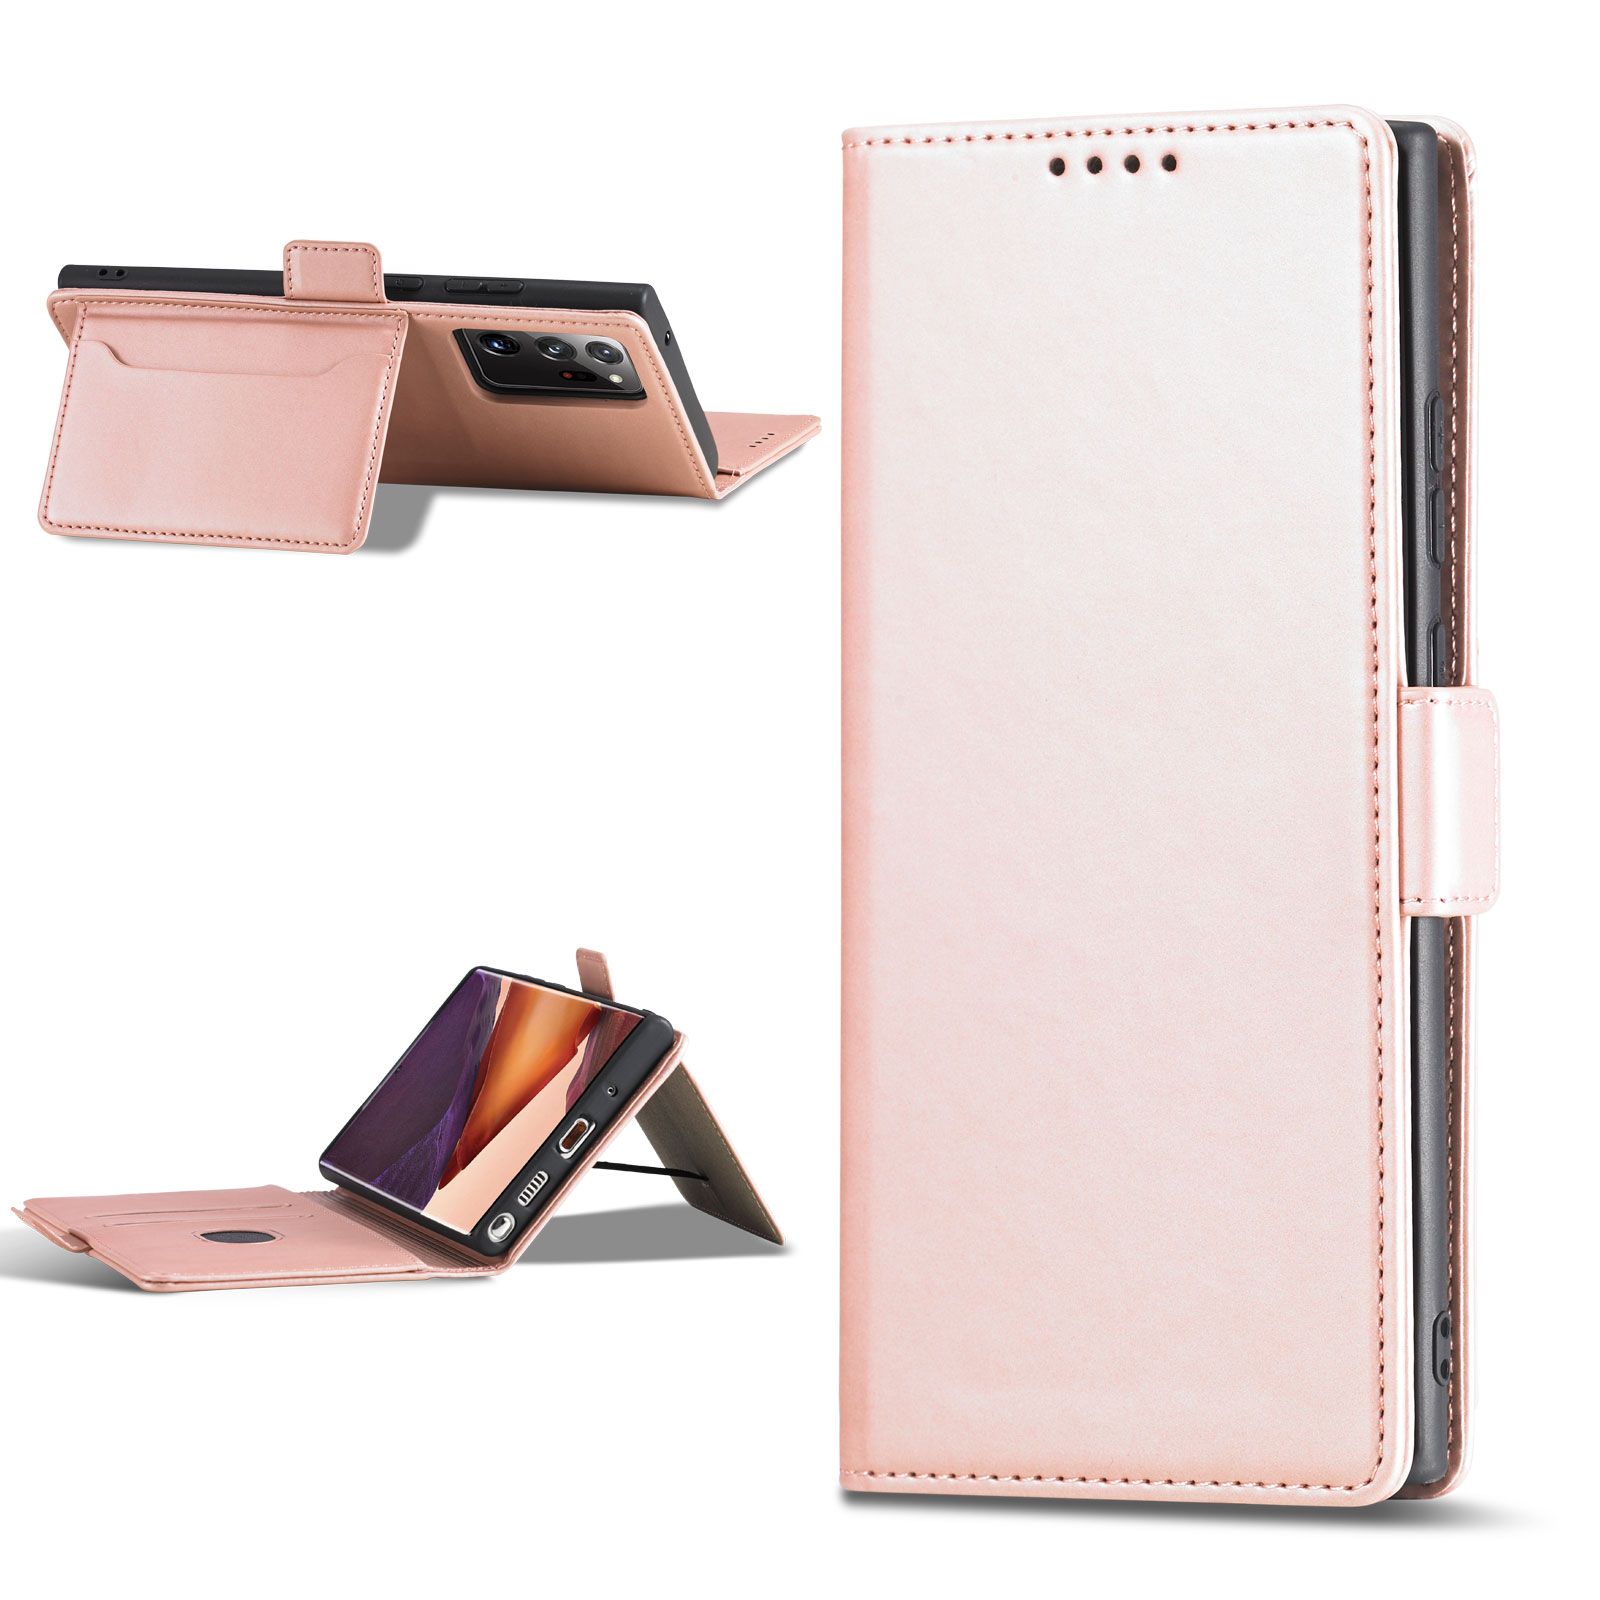 Bakeey-for-Samsung-Galaxy-Note-20-Case-Business-Flip-Magnetic-with-Multi-Card-Slots-Wallet-Shockproo-1763271-13